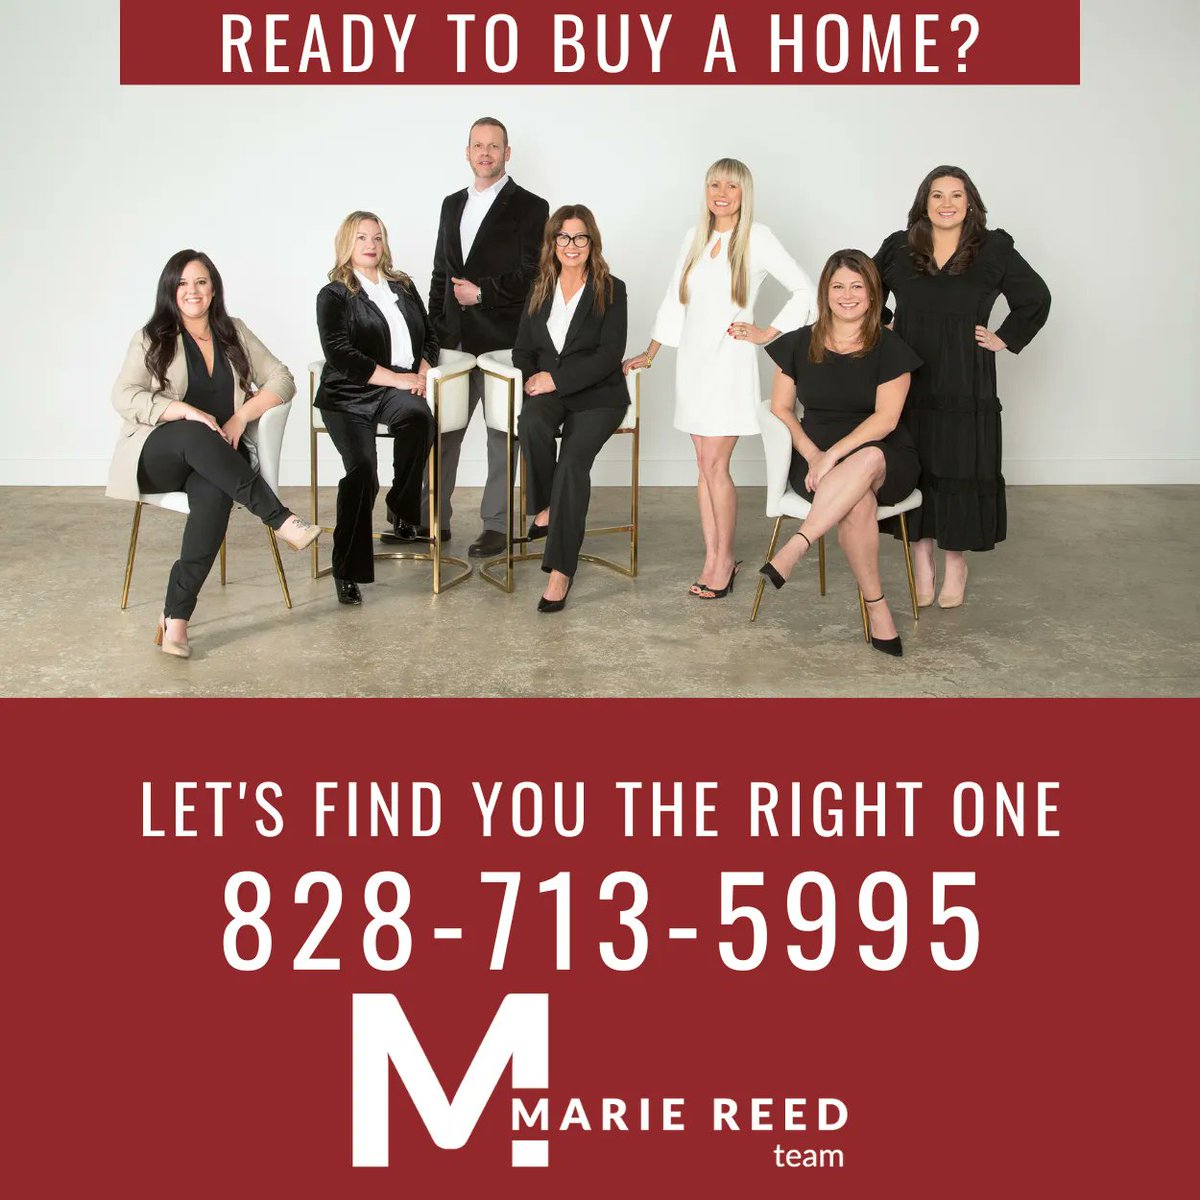 Ready to buy a new home? Let the #MARIEREEDTEAM find you the right one!

#ASHEVILLEREALESTATE
#ASHEVILLEREALTOR
#WNC #AVL